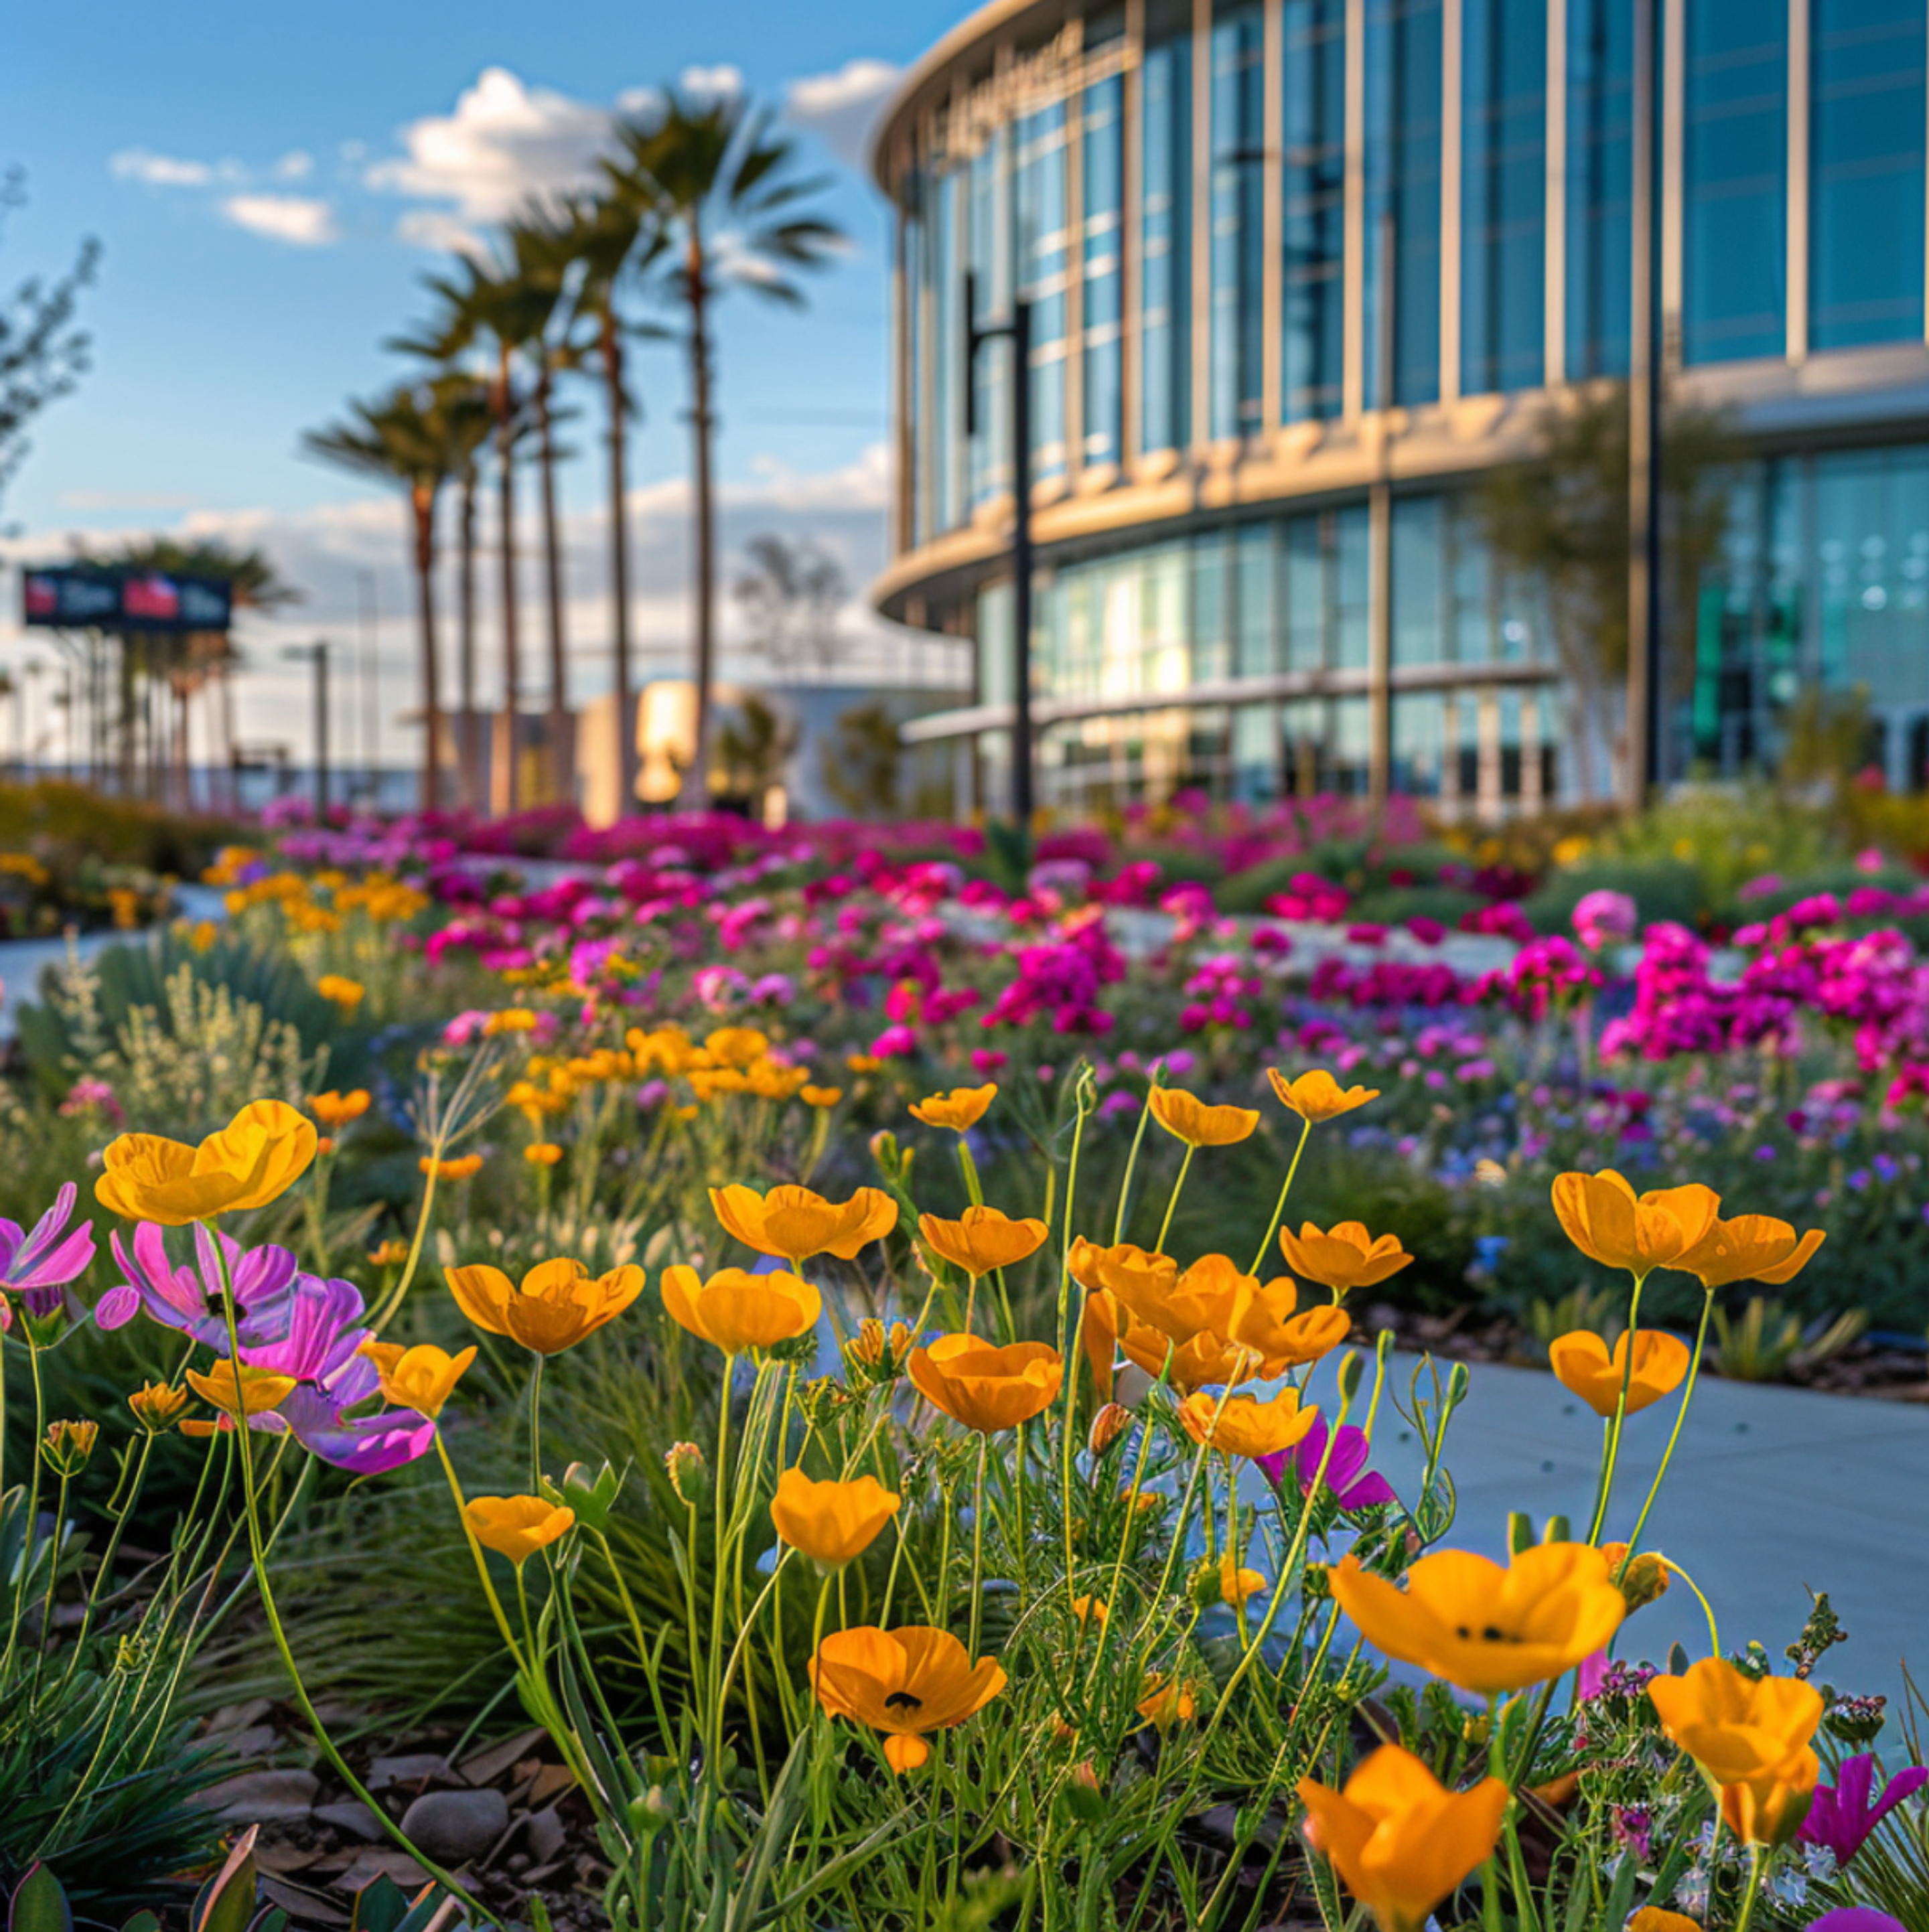 Lush garden in Carson, California, featuring a colorful array of blooming poppies and other flowers, with palm trees and modern architecture in the background, conveying the city's harmonious blend of urban development and natural beauty.